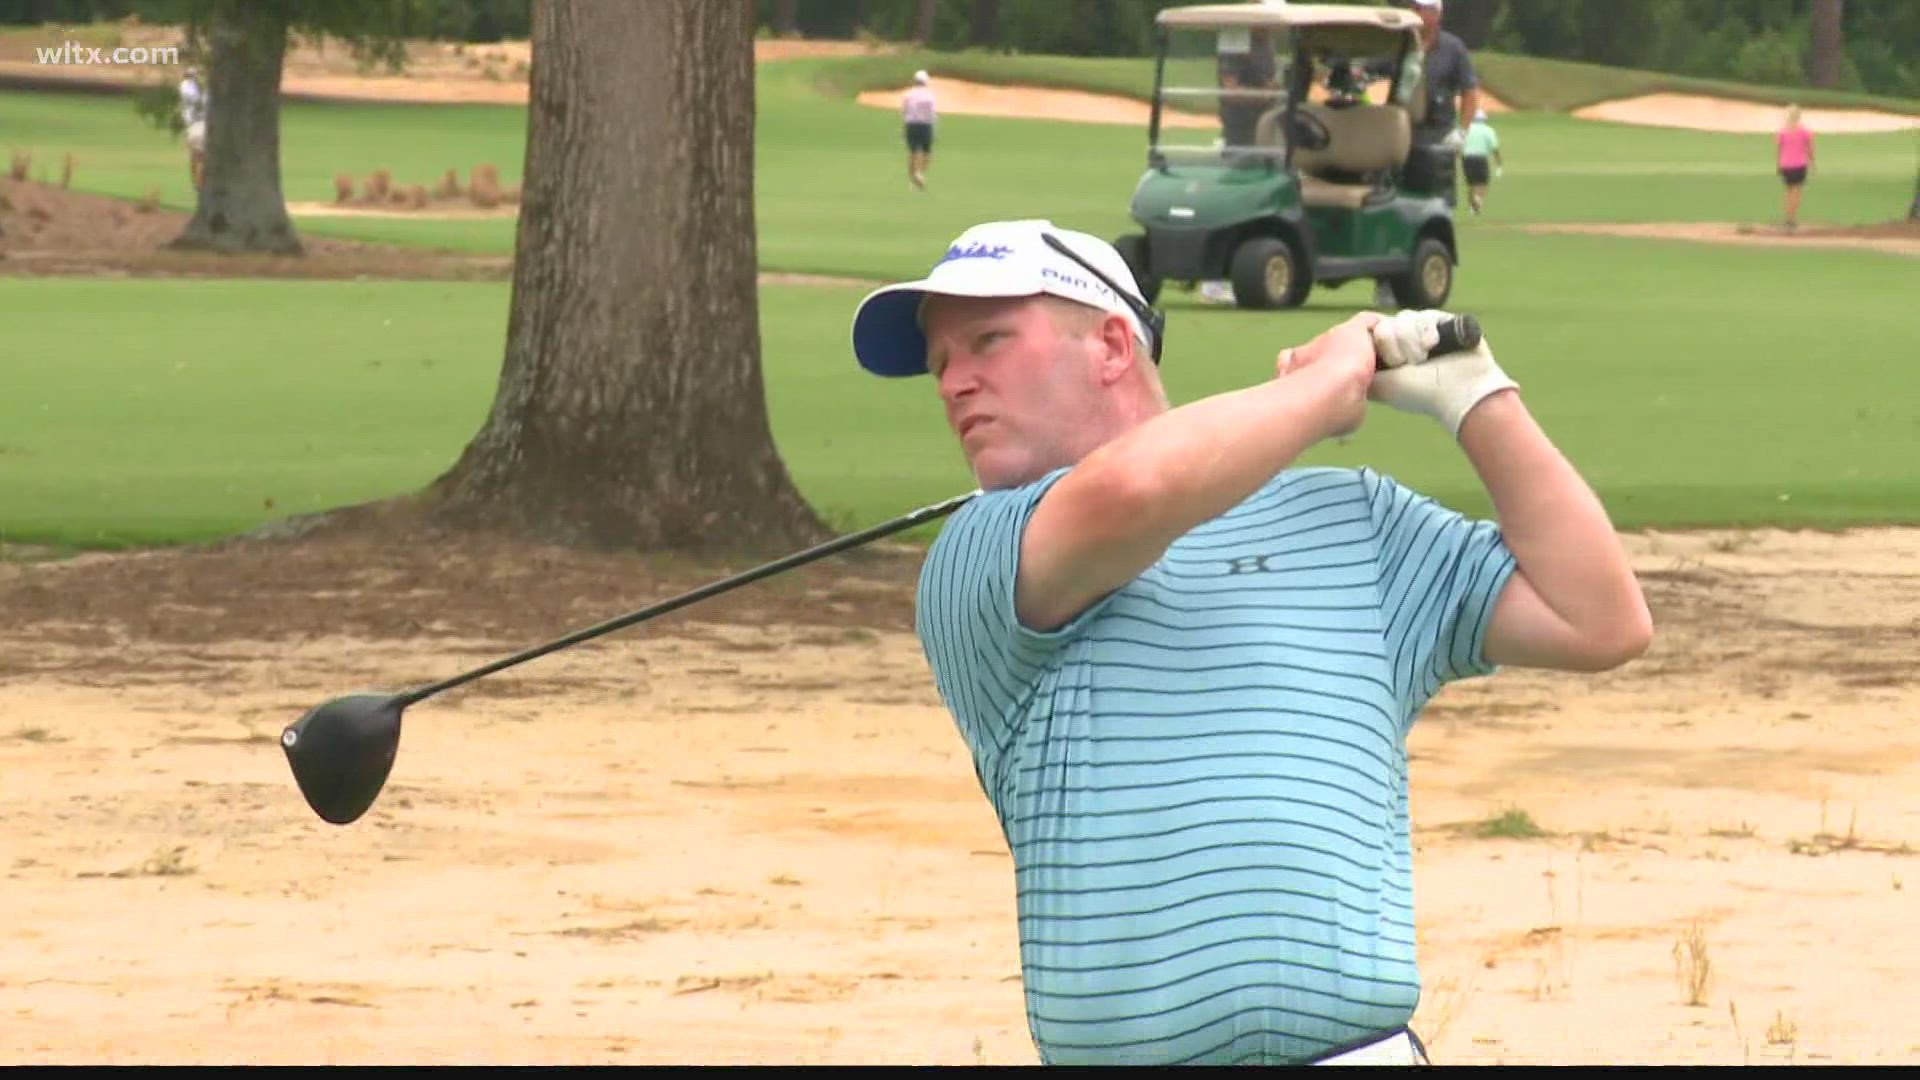 More than 80 golfers were at the Quixote Club in Sumter for a U.S. Senior Open qualifying event.